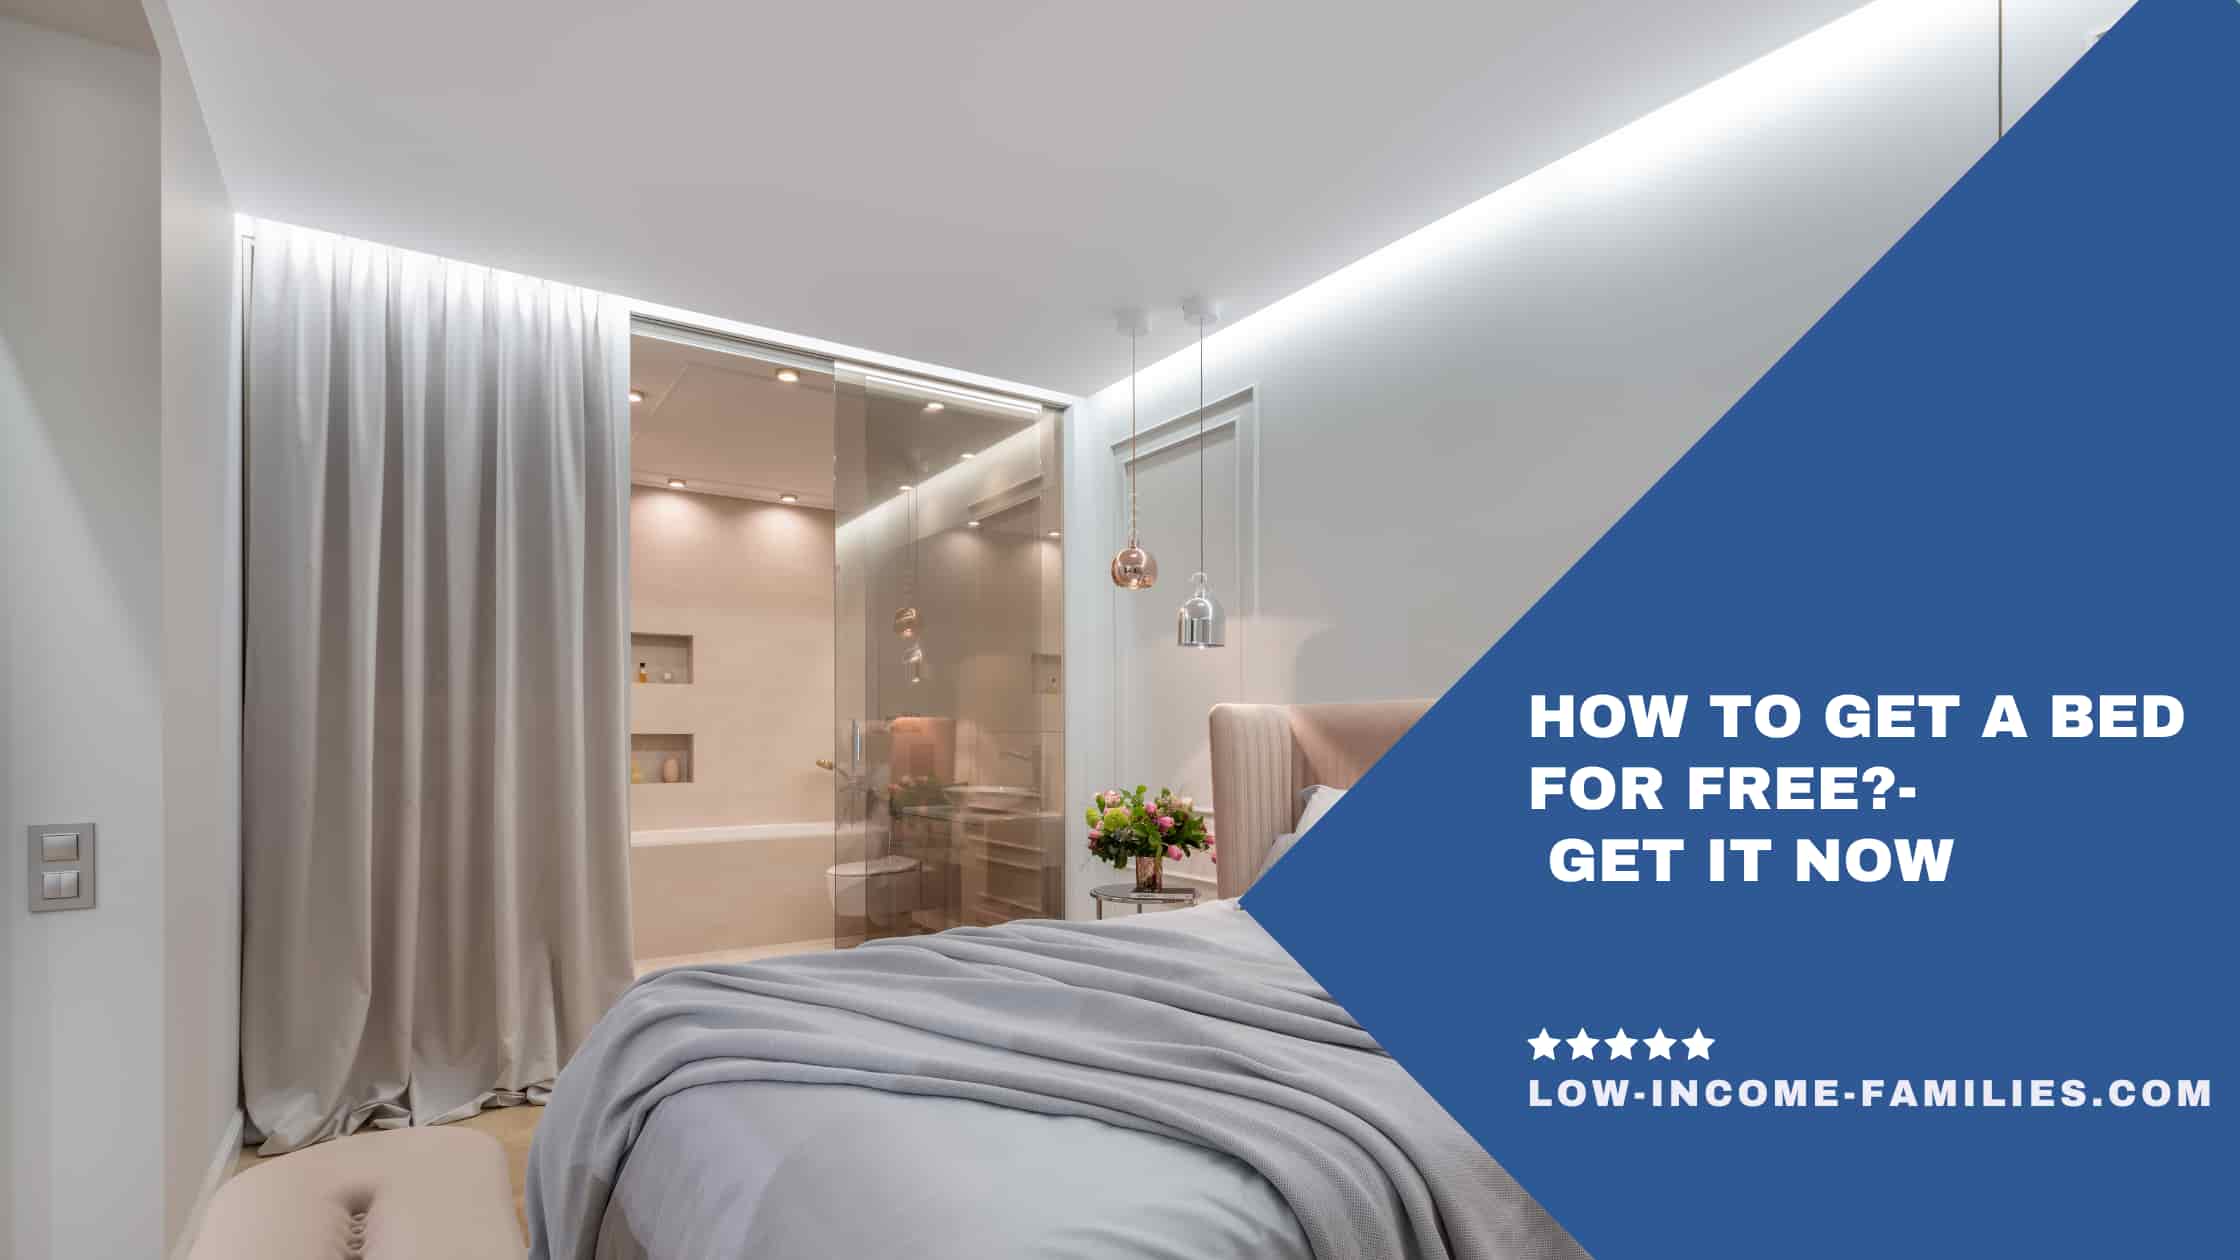 How to Get a Bed for Free?- Get It Now